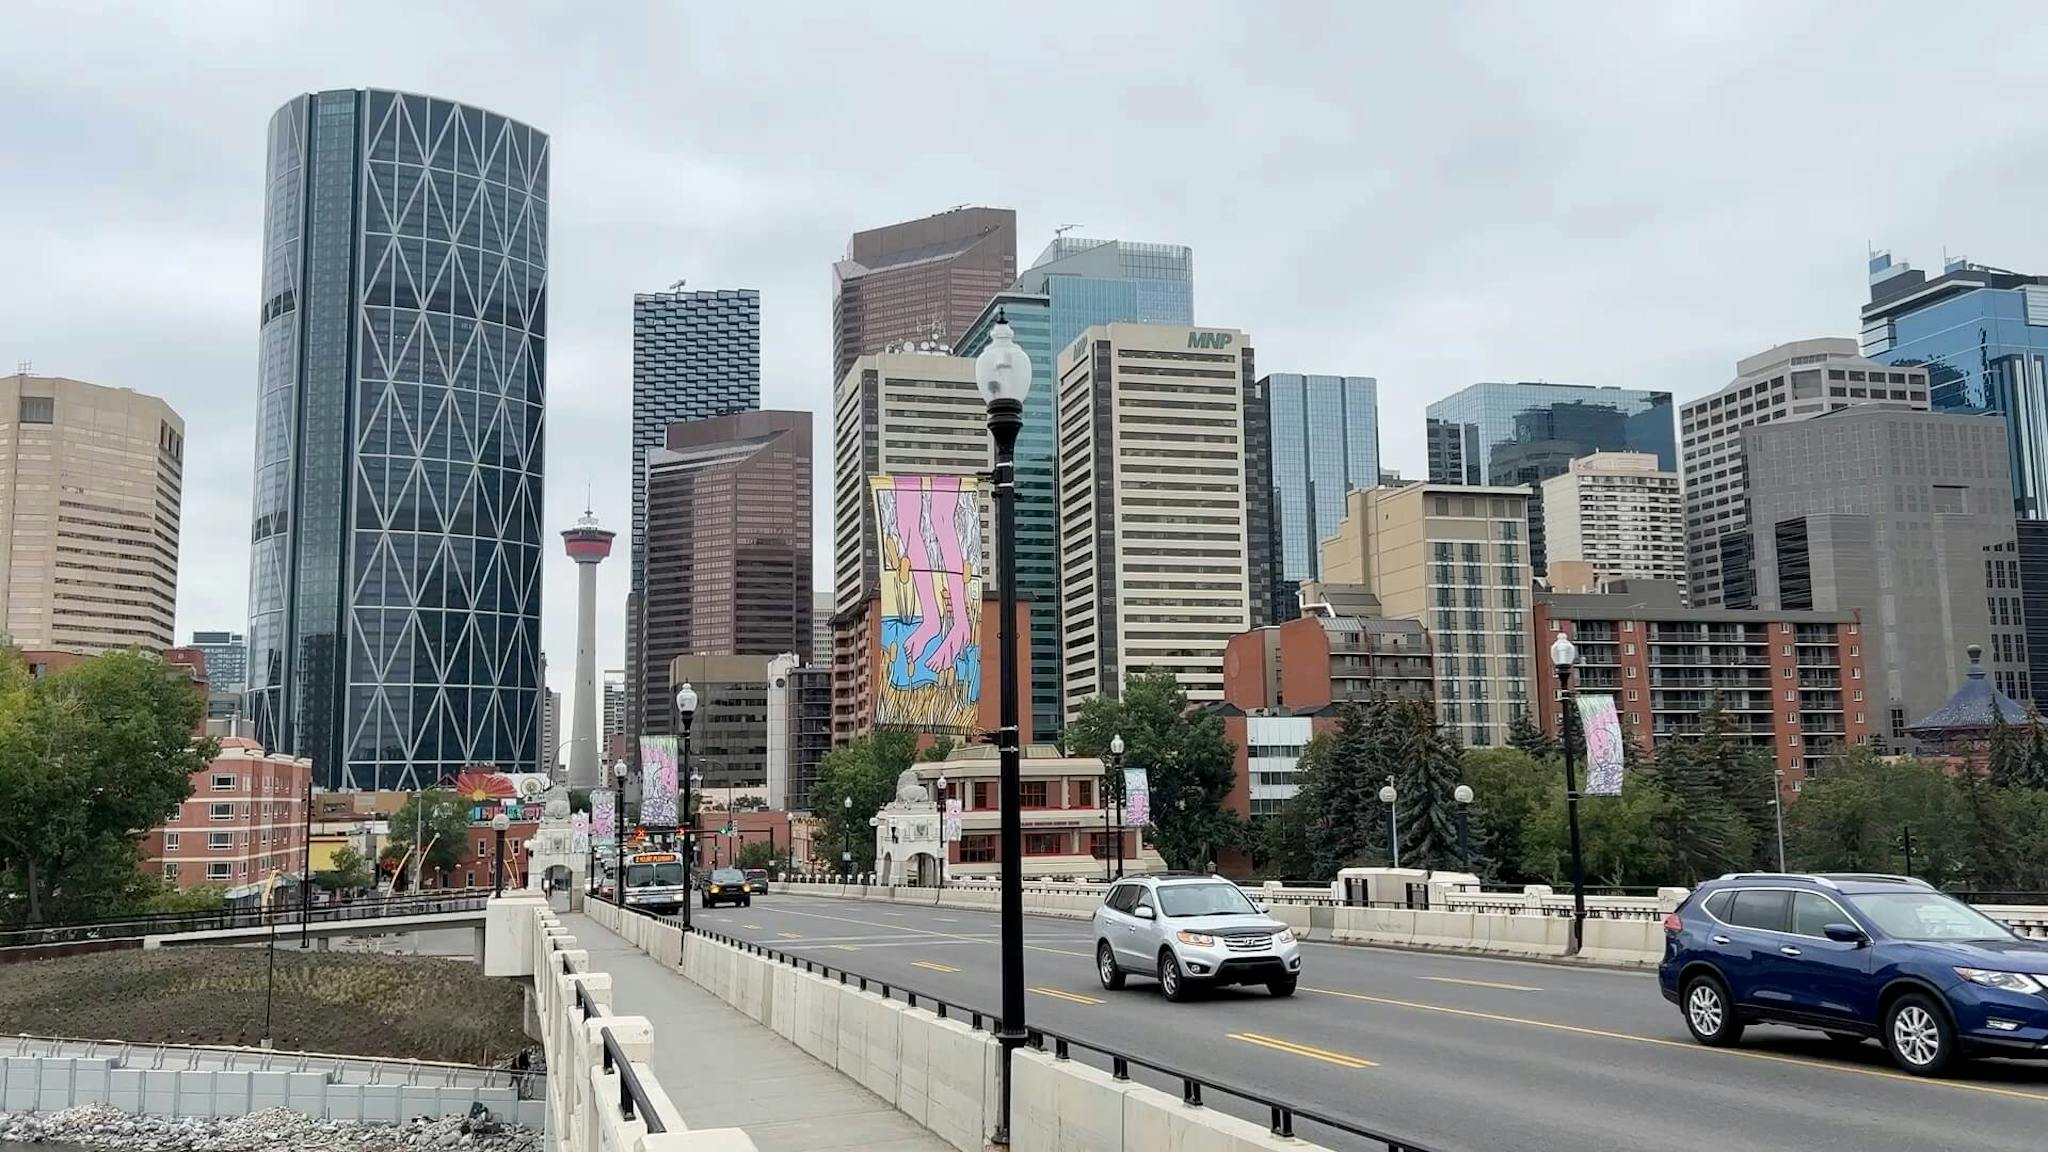 Downtown Calgary as viewed from an overpass on an overcast day.